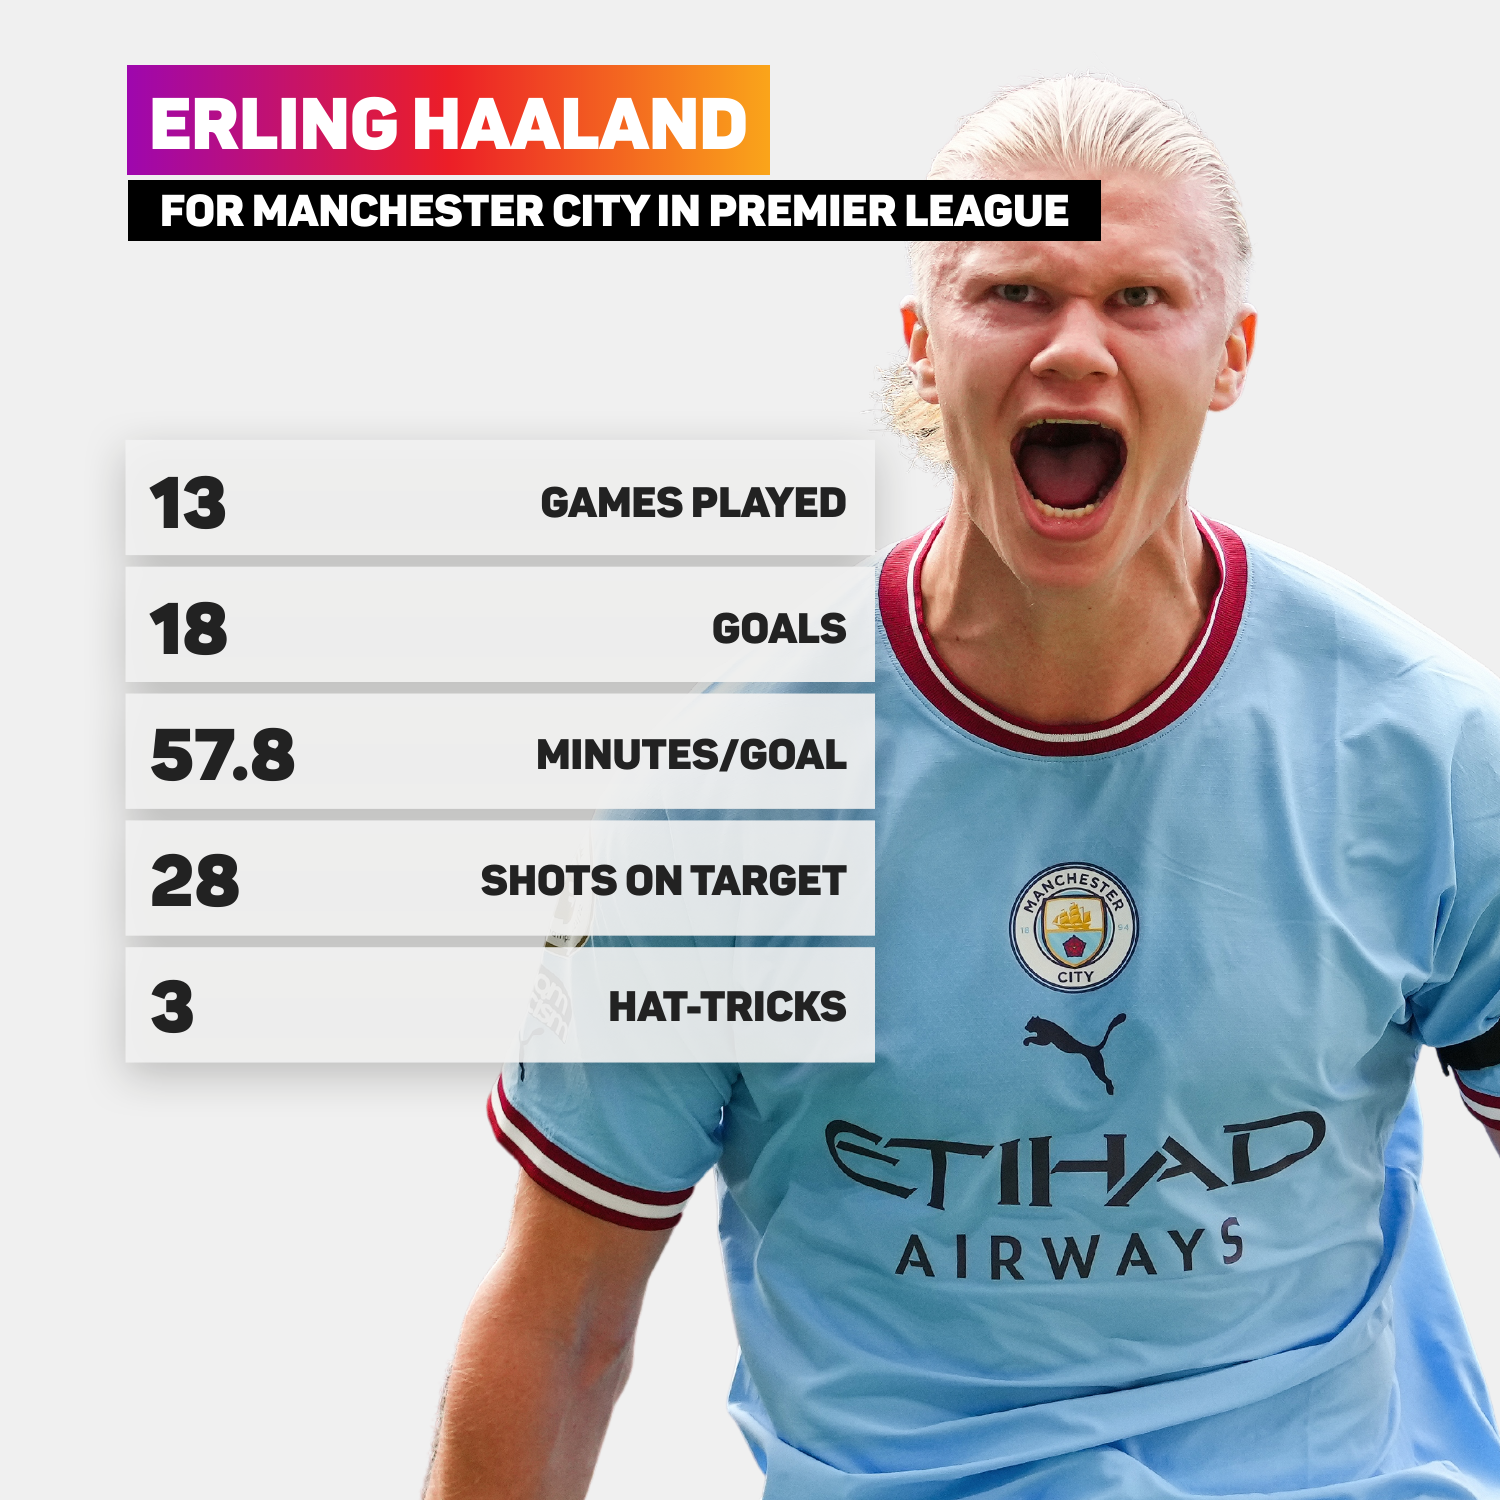 Erling Haaland has been almost unstoppable this season